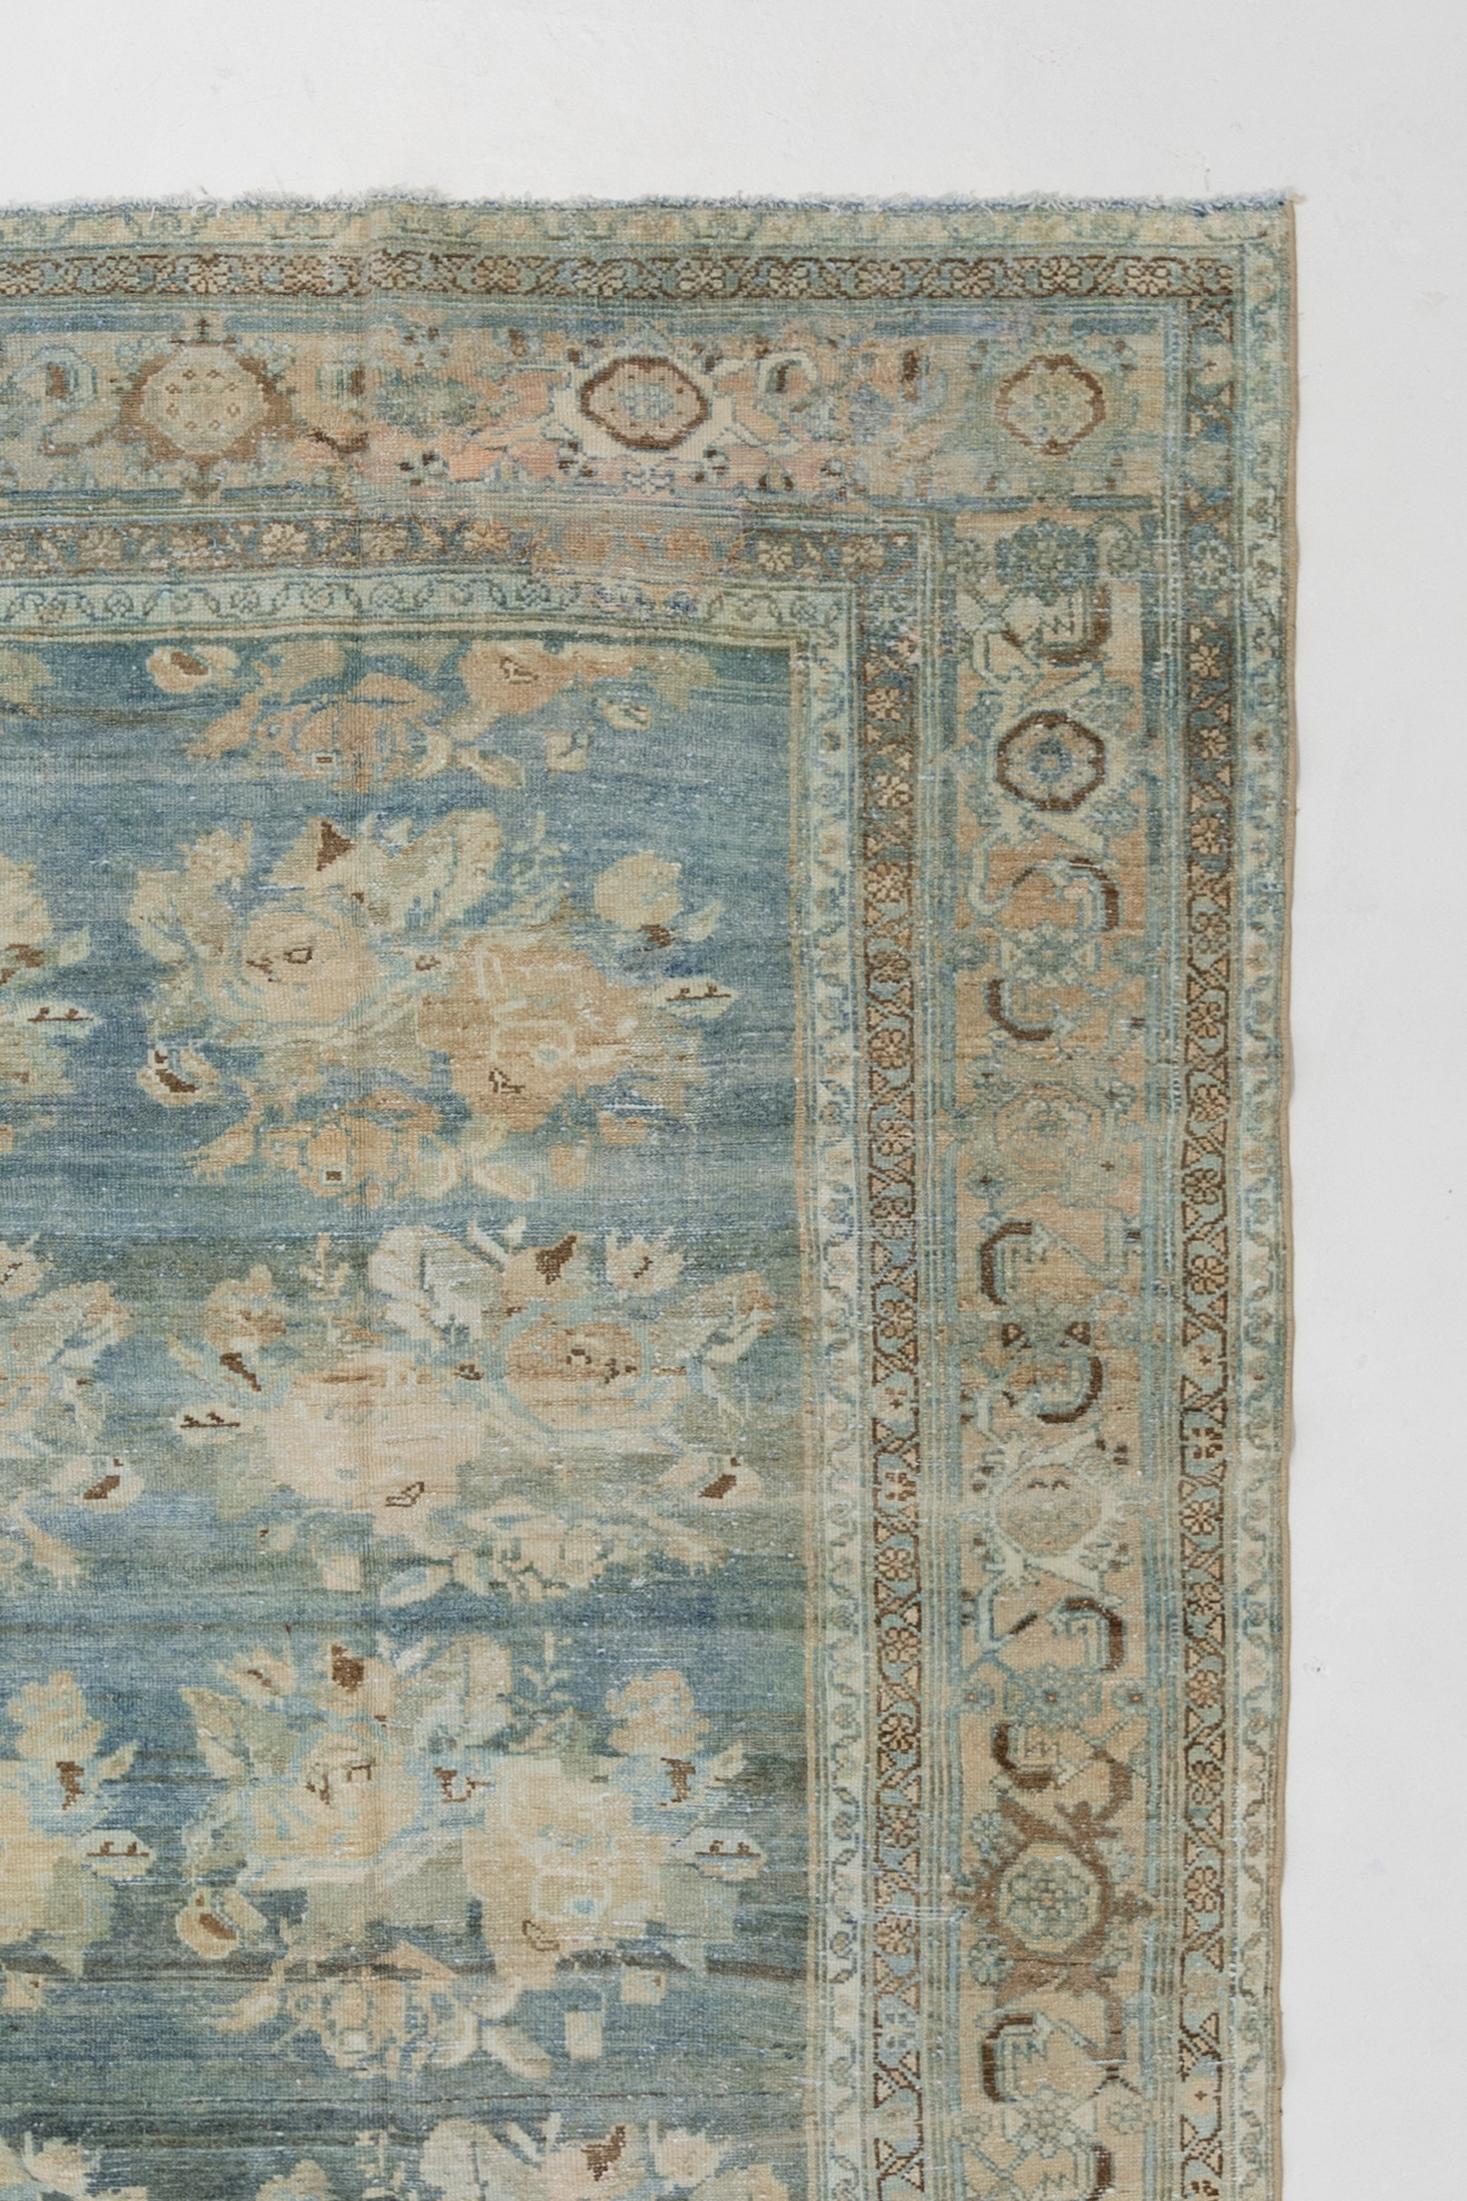 Age: Circa 1930

Colors: blue, green, ivory, tan

Pile: low-medium

Wear Notes: 1

Material: Wool on Cotton. 

Vintage Persian Bidjar, woven in the early 20th century. Gorgeous large scale bouquets of flowers that are meticulously detailed. The rows